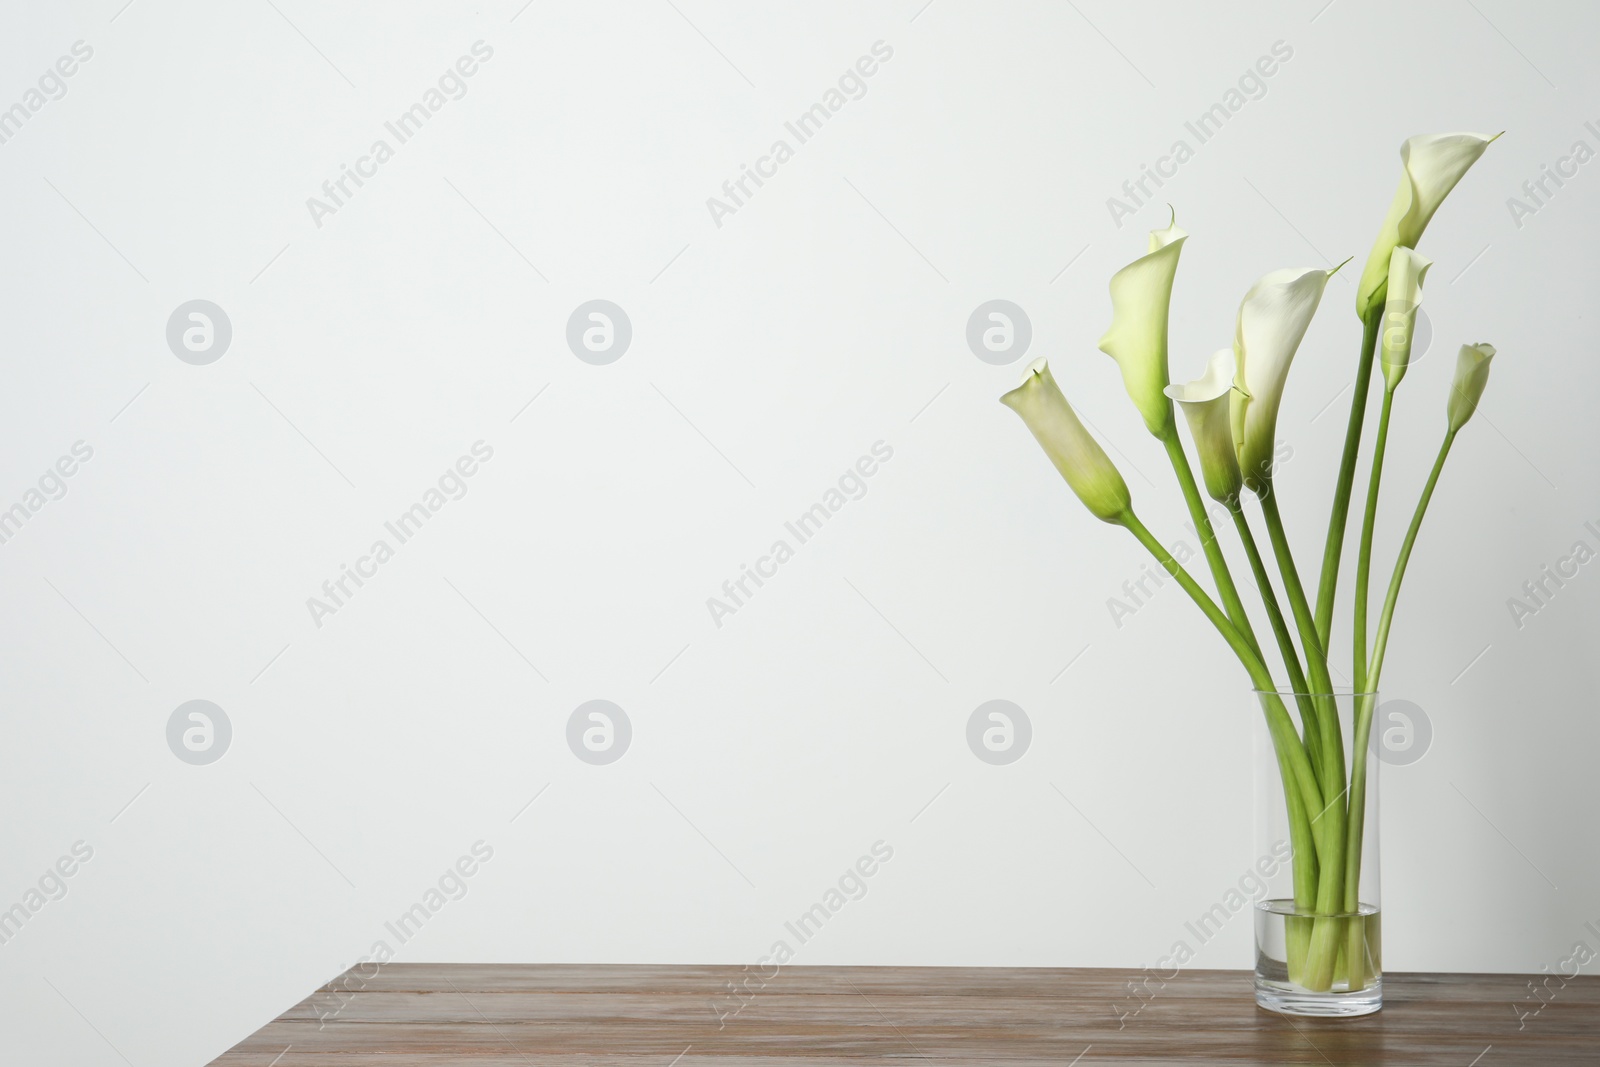 Photo of Beautiful calla lily flowers in vase on wooden table against white background. Space for text